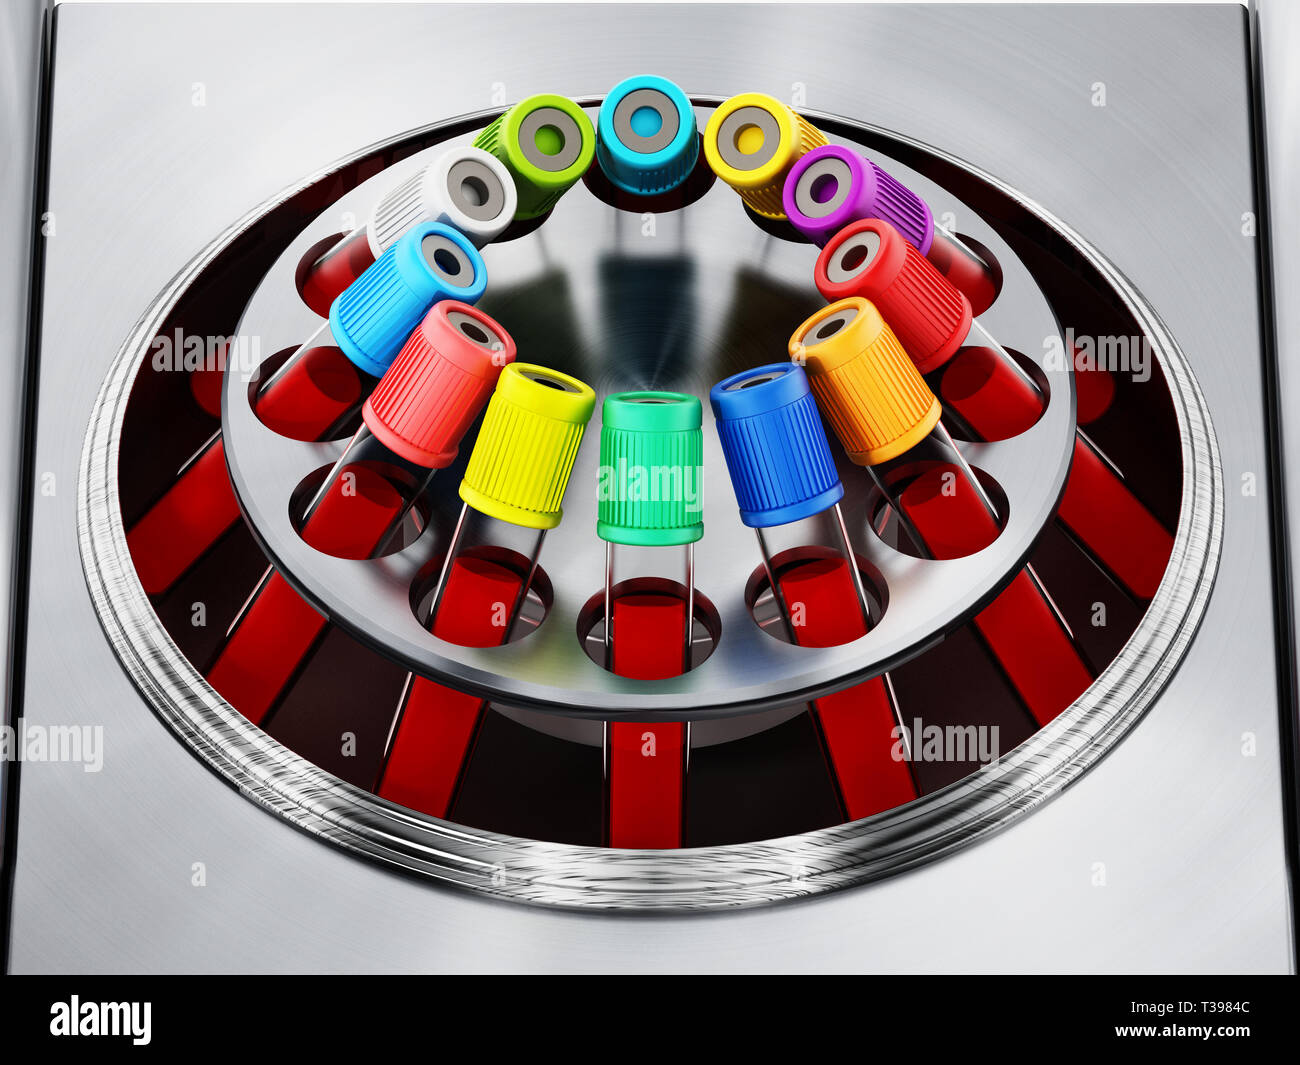 Blood centrifuge machine with test tubes full of blood samples. 3D illustration. Stock Photo